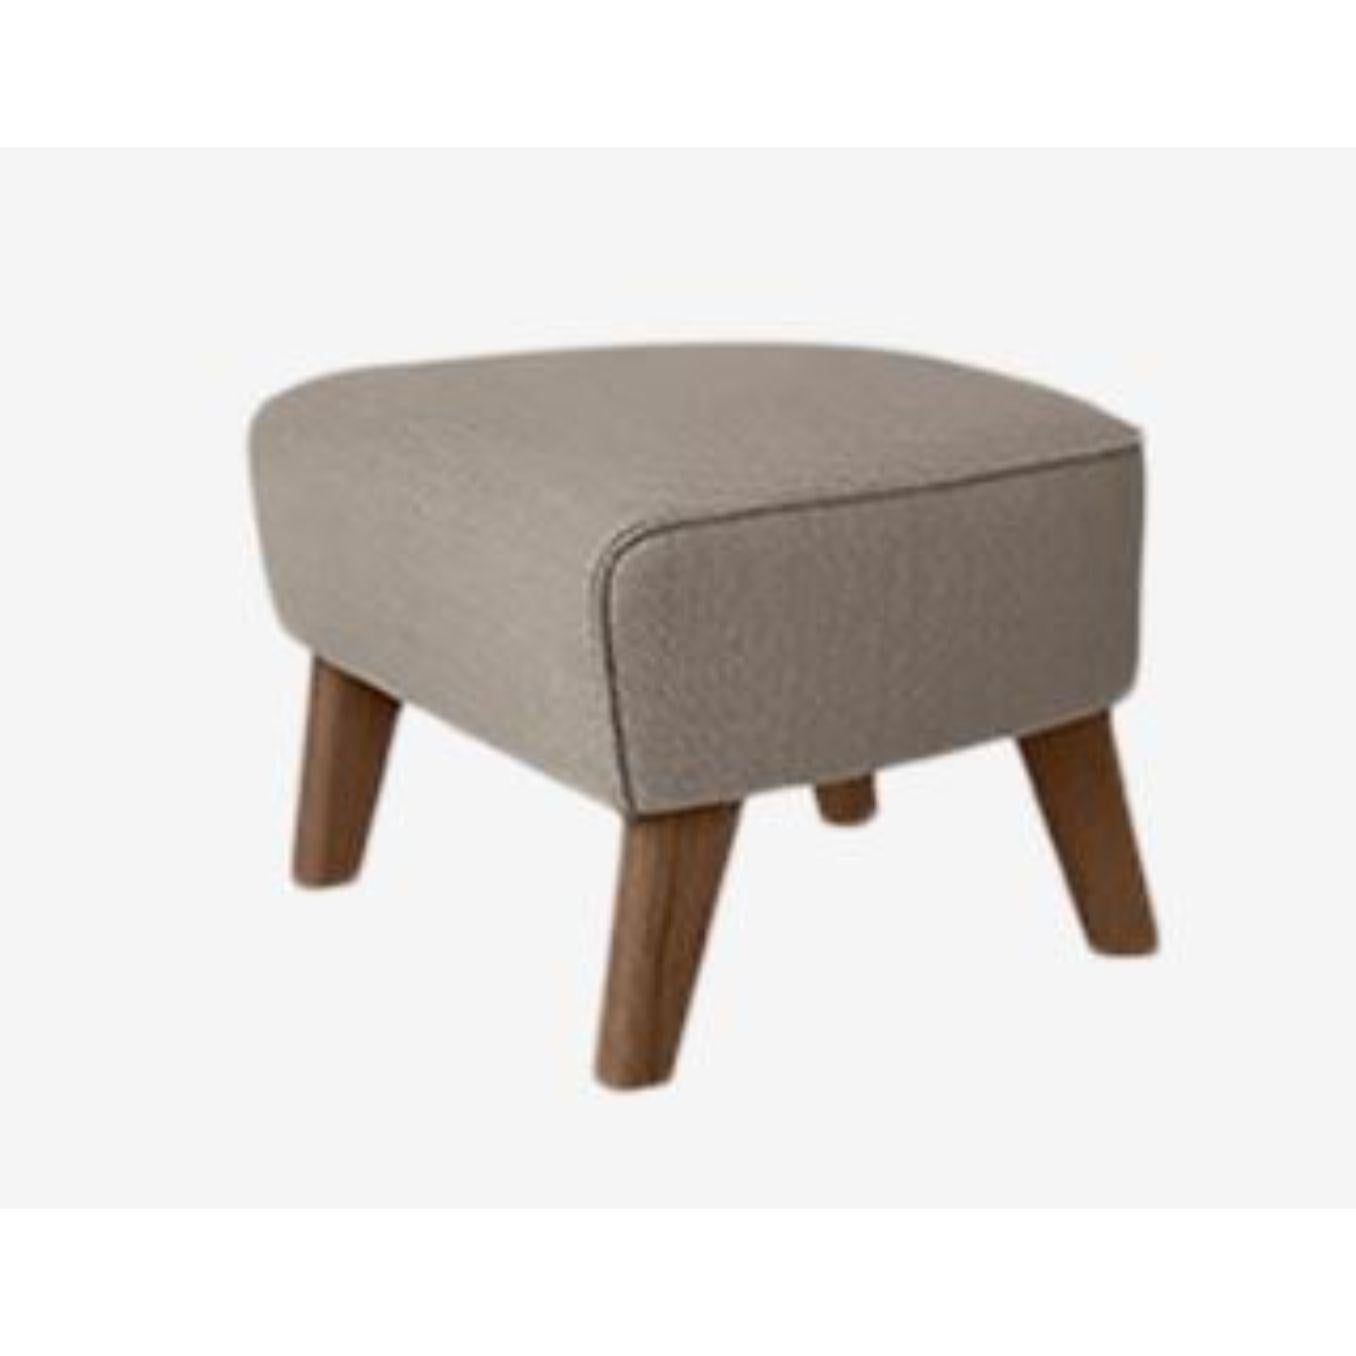 323 Raf Simons Vidar 3 My Own chair footsool by Lassen
Dimensions: D 58 x W 56 x H 40 cm 
Materials: textile, smoked oak, 
Also available in different colors and materials. 
Weight: 18 Kg

The My Own Chair Footstool has been designed in the